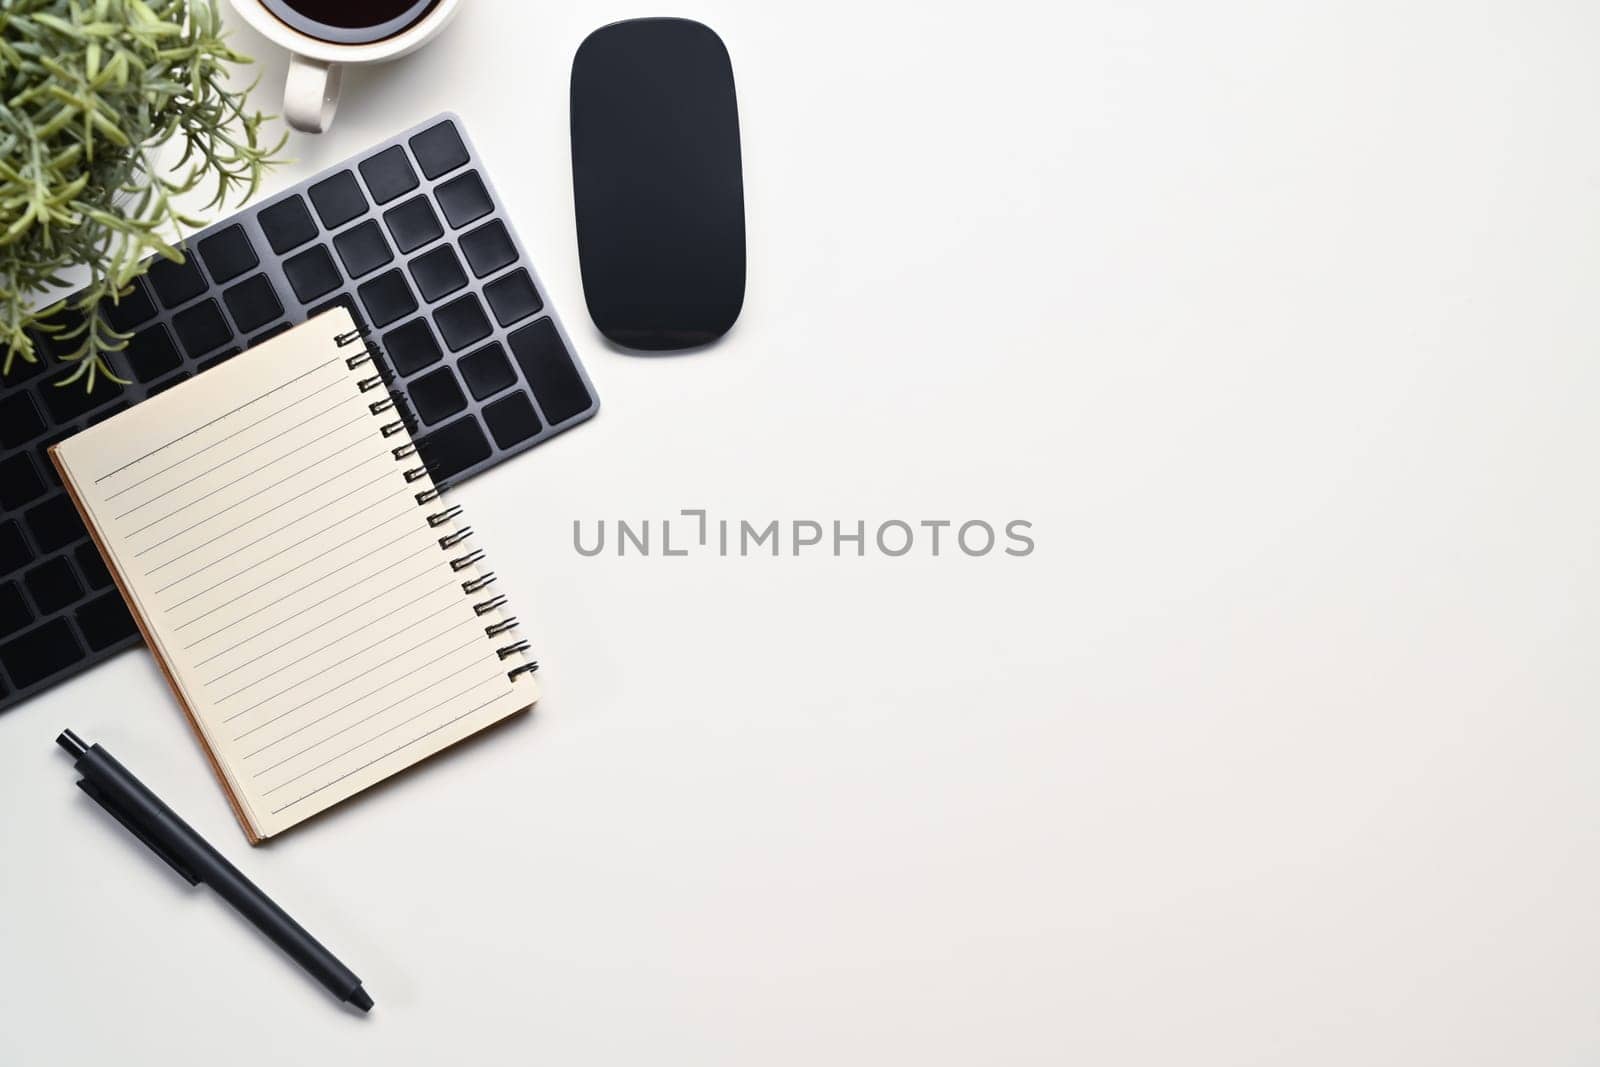 White office desk with wireless keyboard, mouse, notepad and coffee cup. Top view with copy space for text by prathanchorruangsak